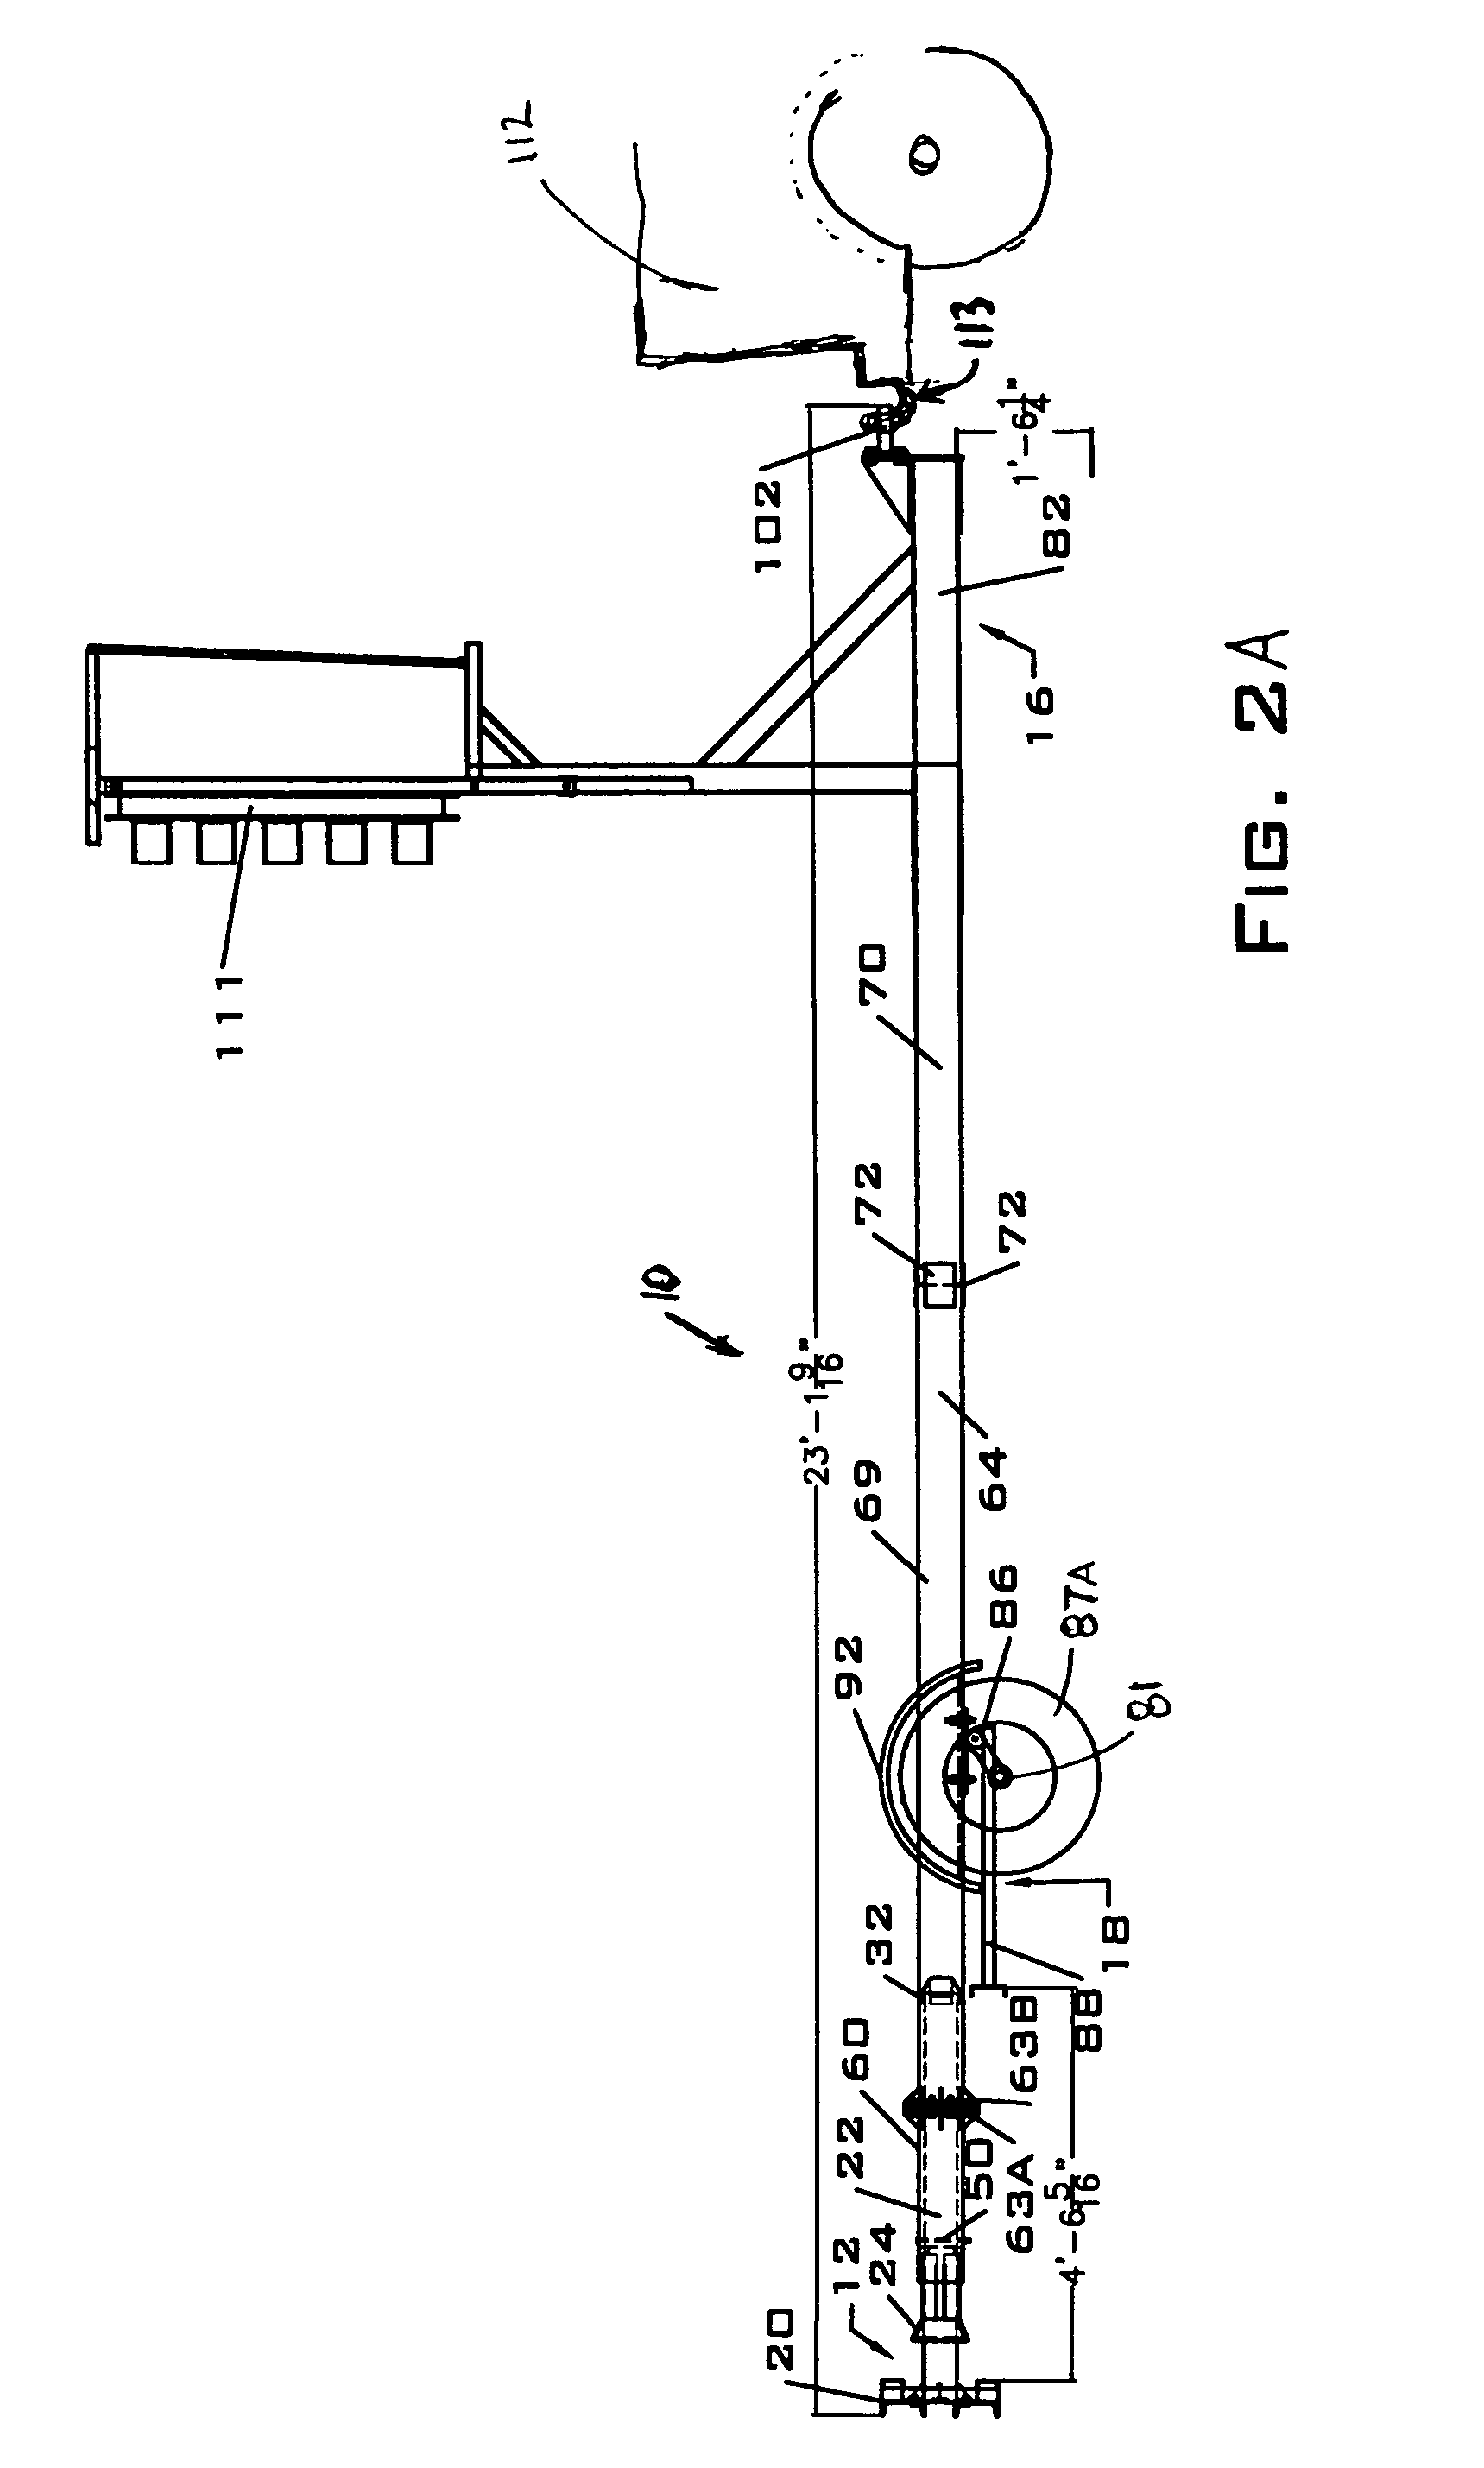 Trailer mounted attenuator with breakaway axle assembly